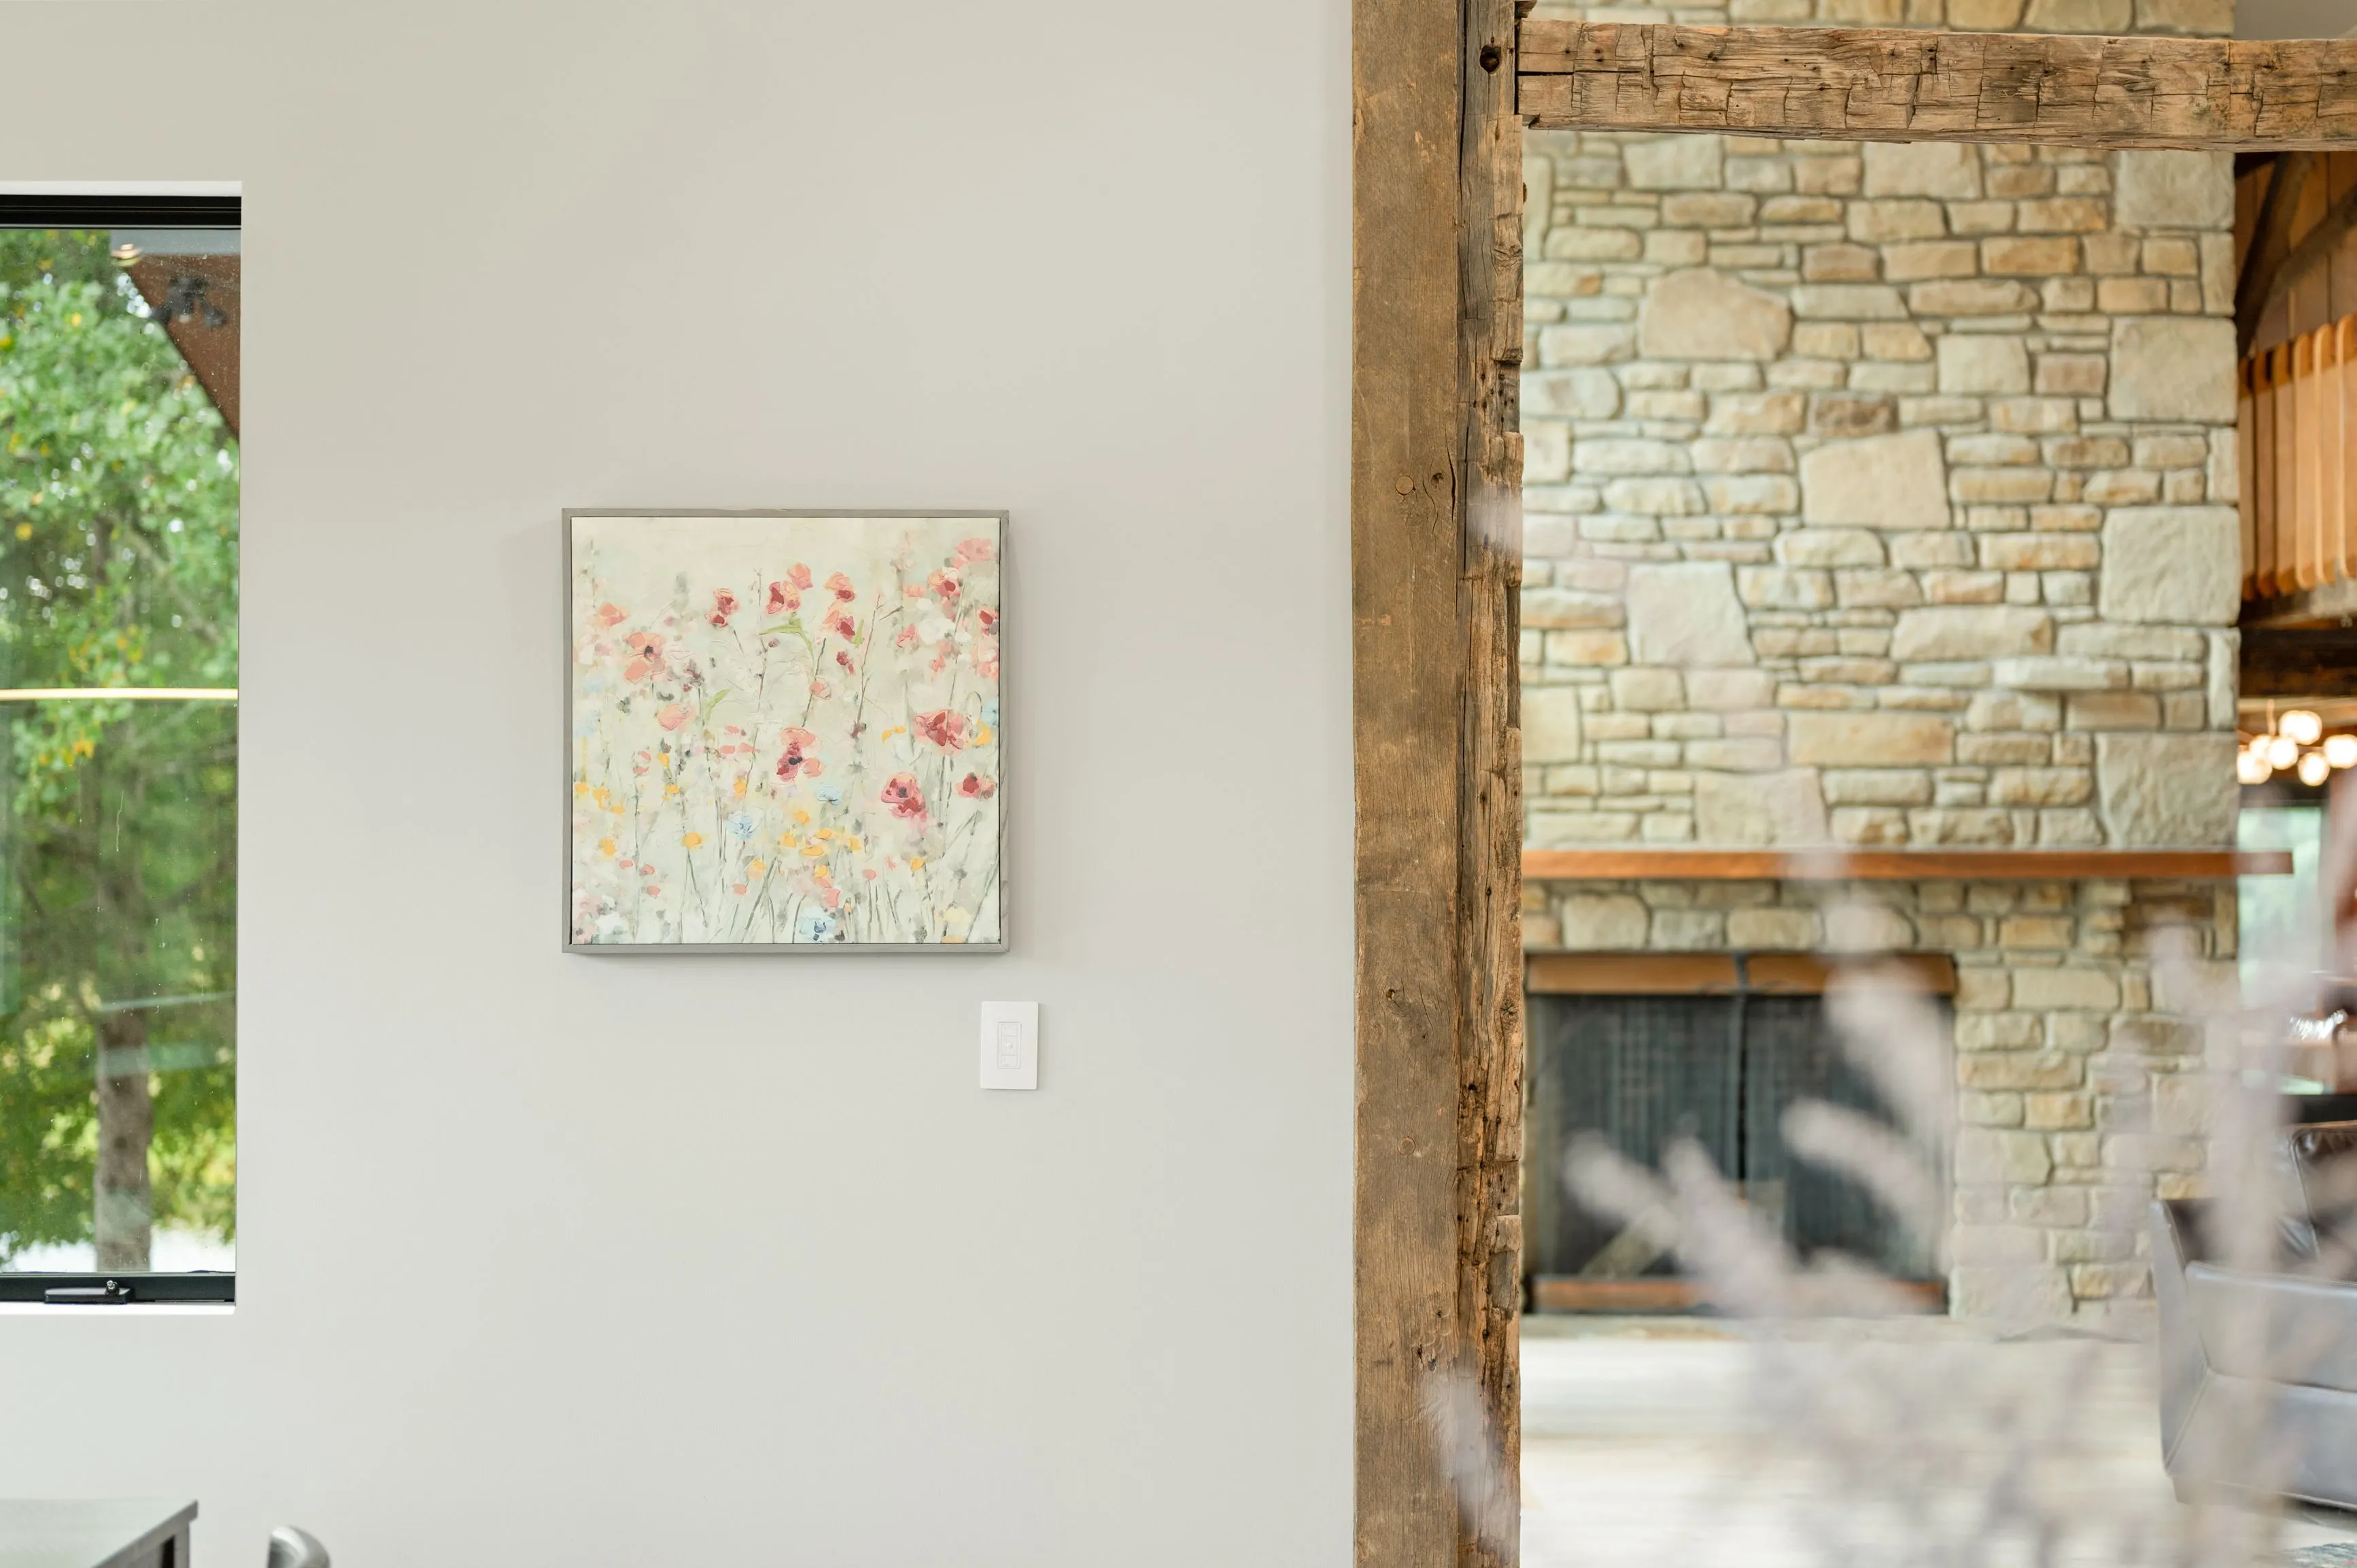 A split image showing the interior of a modern home with an abstract floral painting on the left and a rustic stone fireplace on the right, separated by a wooden beam.